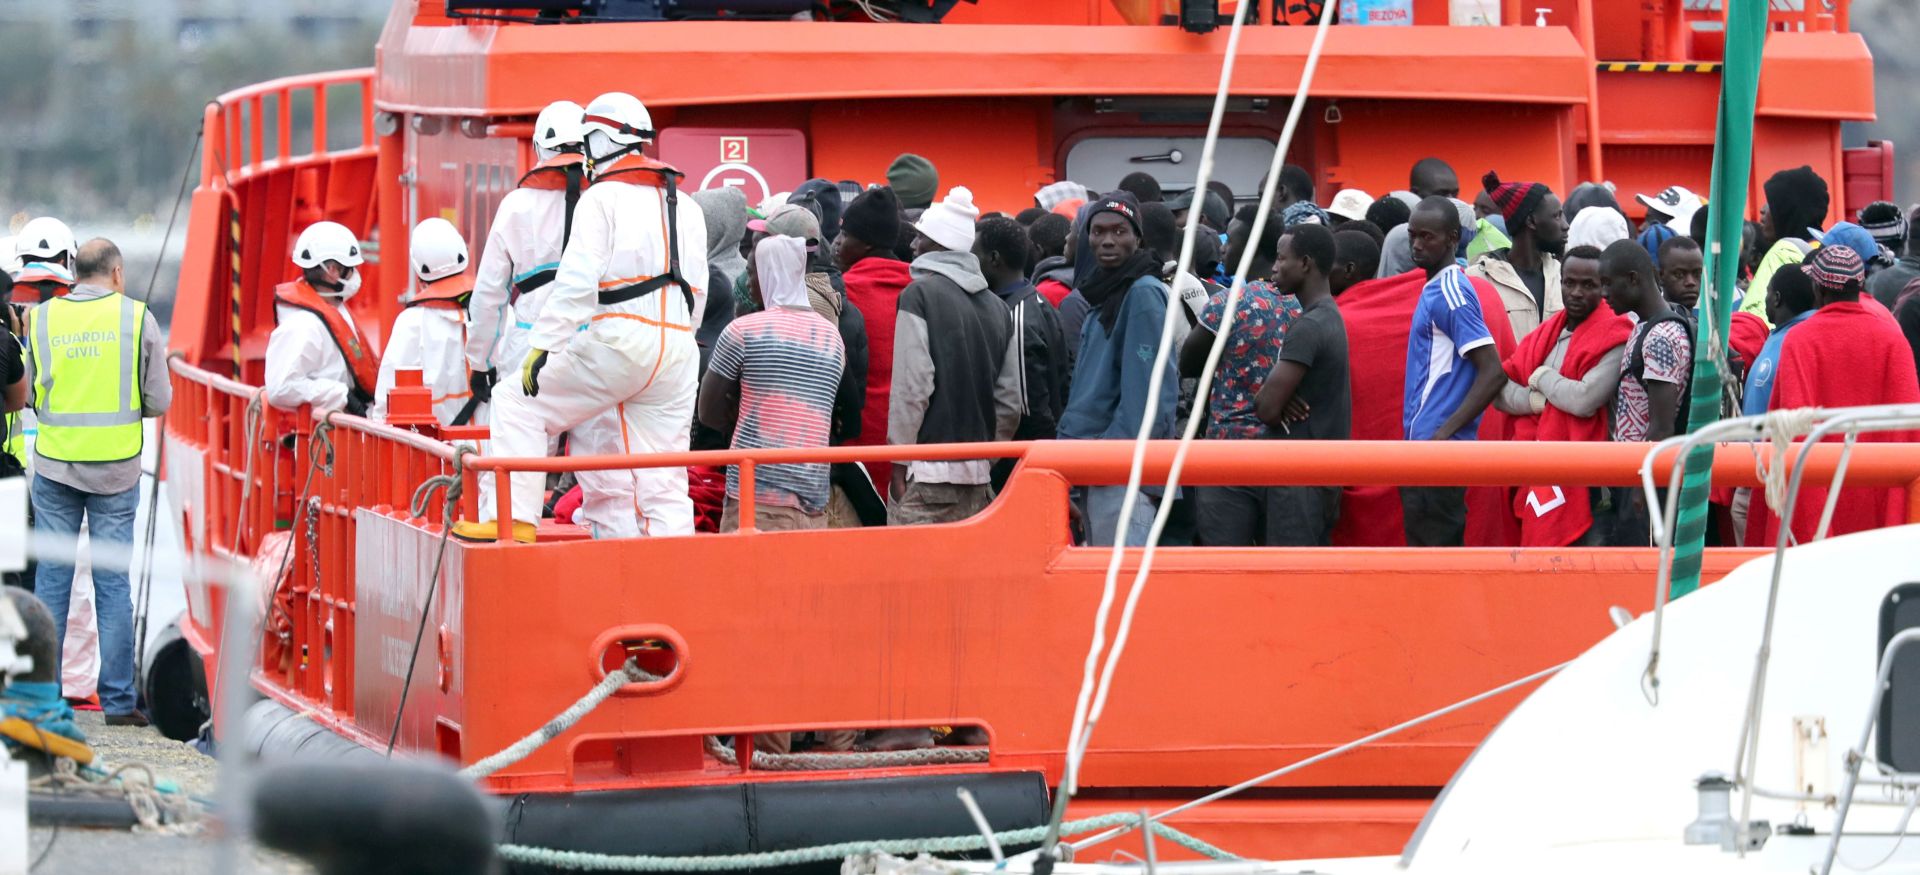 epa06818113 Spanish Civil Guards, National policemen and Red Cross volunteers help migrants to disembark from a rescue ship upon their arrival to the port of Arguineguin in Gran Canaria, Canary islands, Spain, 18 June 2018. A total of 152 migrants traveling on board a small boat were rescued 17 June night about 410 kilometers away from the Canarias.  EPA/ELVIRA URQUIJO A.